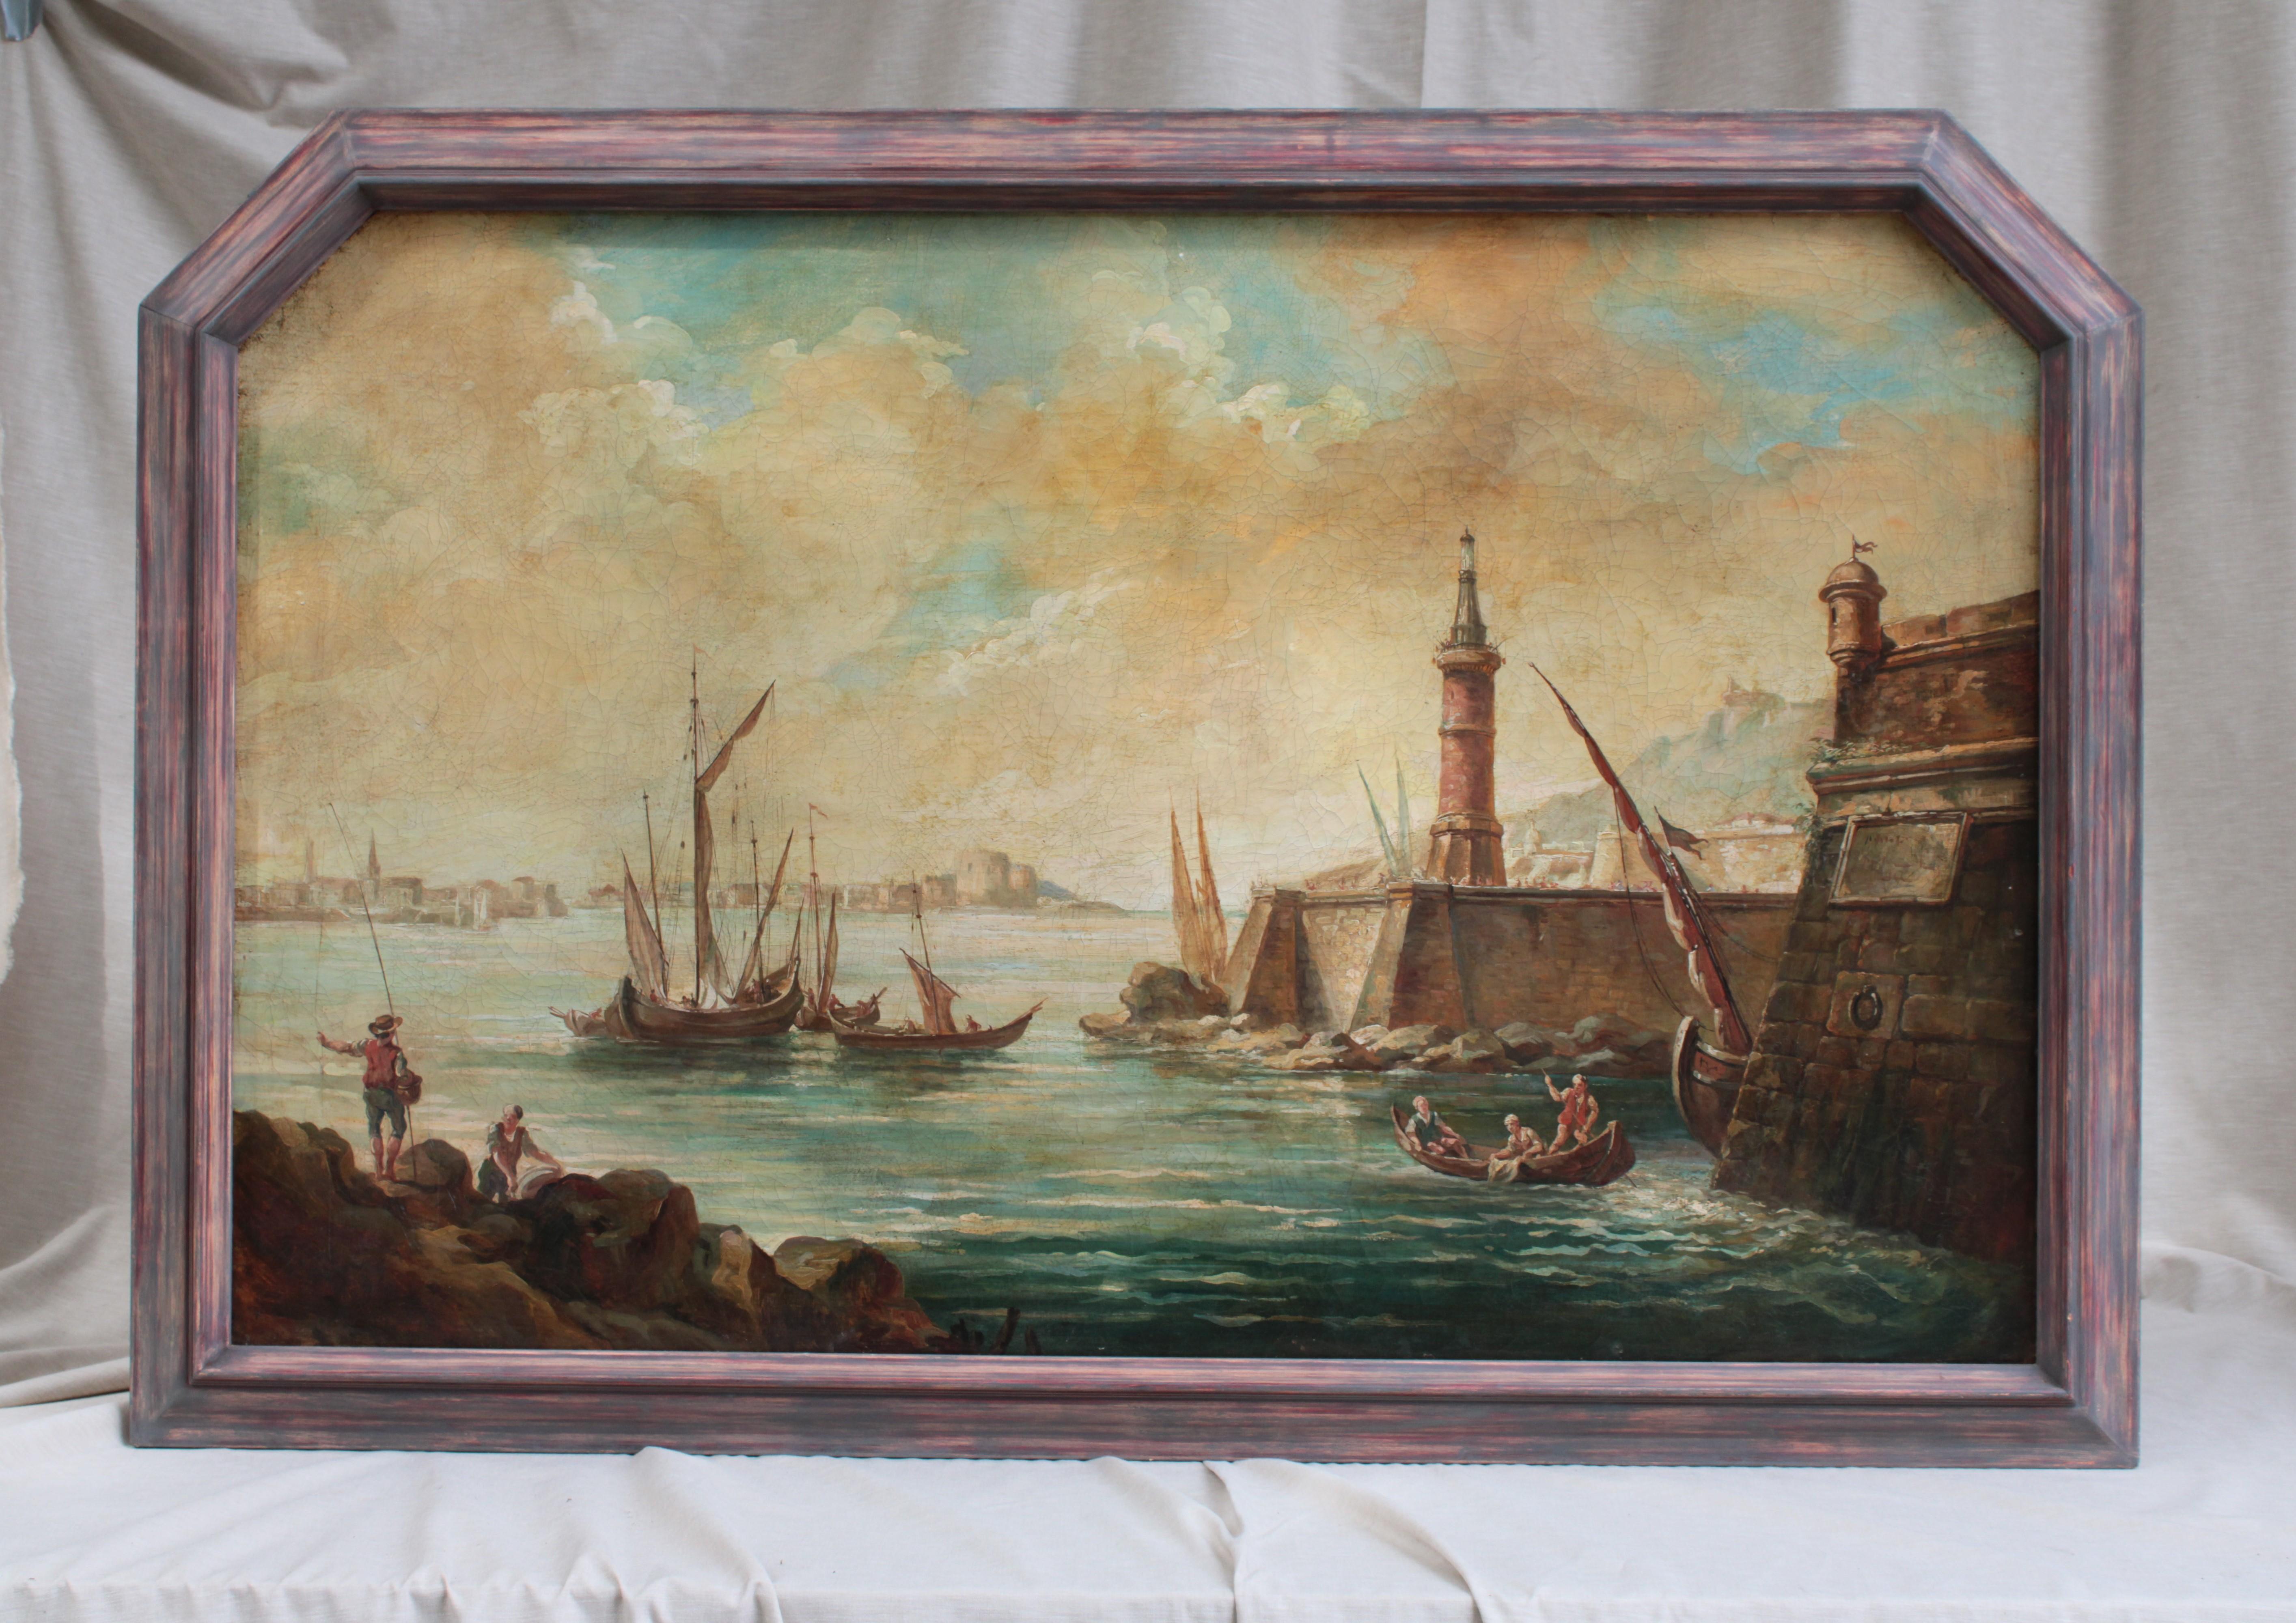 An oil painting on canvas representing a harbor with boats, in Marseille, and attributed to the Joseph Vernet School. France 18th century.

Joseph Vernet was a prominent 18th-century French artist who specialized in depicting maritime scenes and